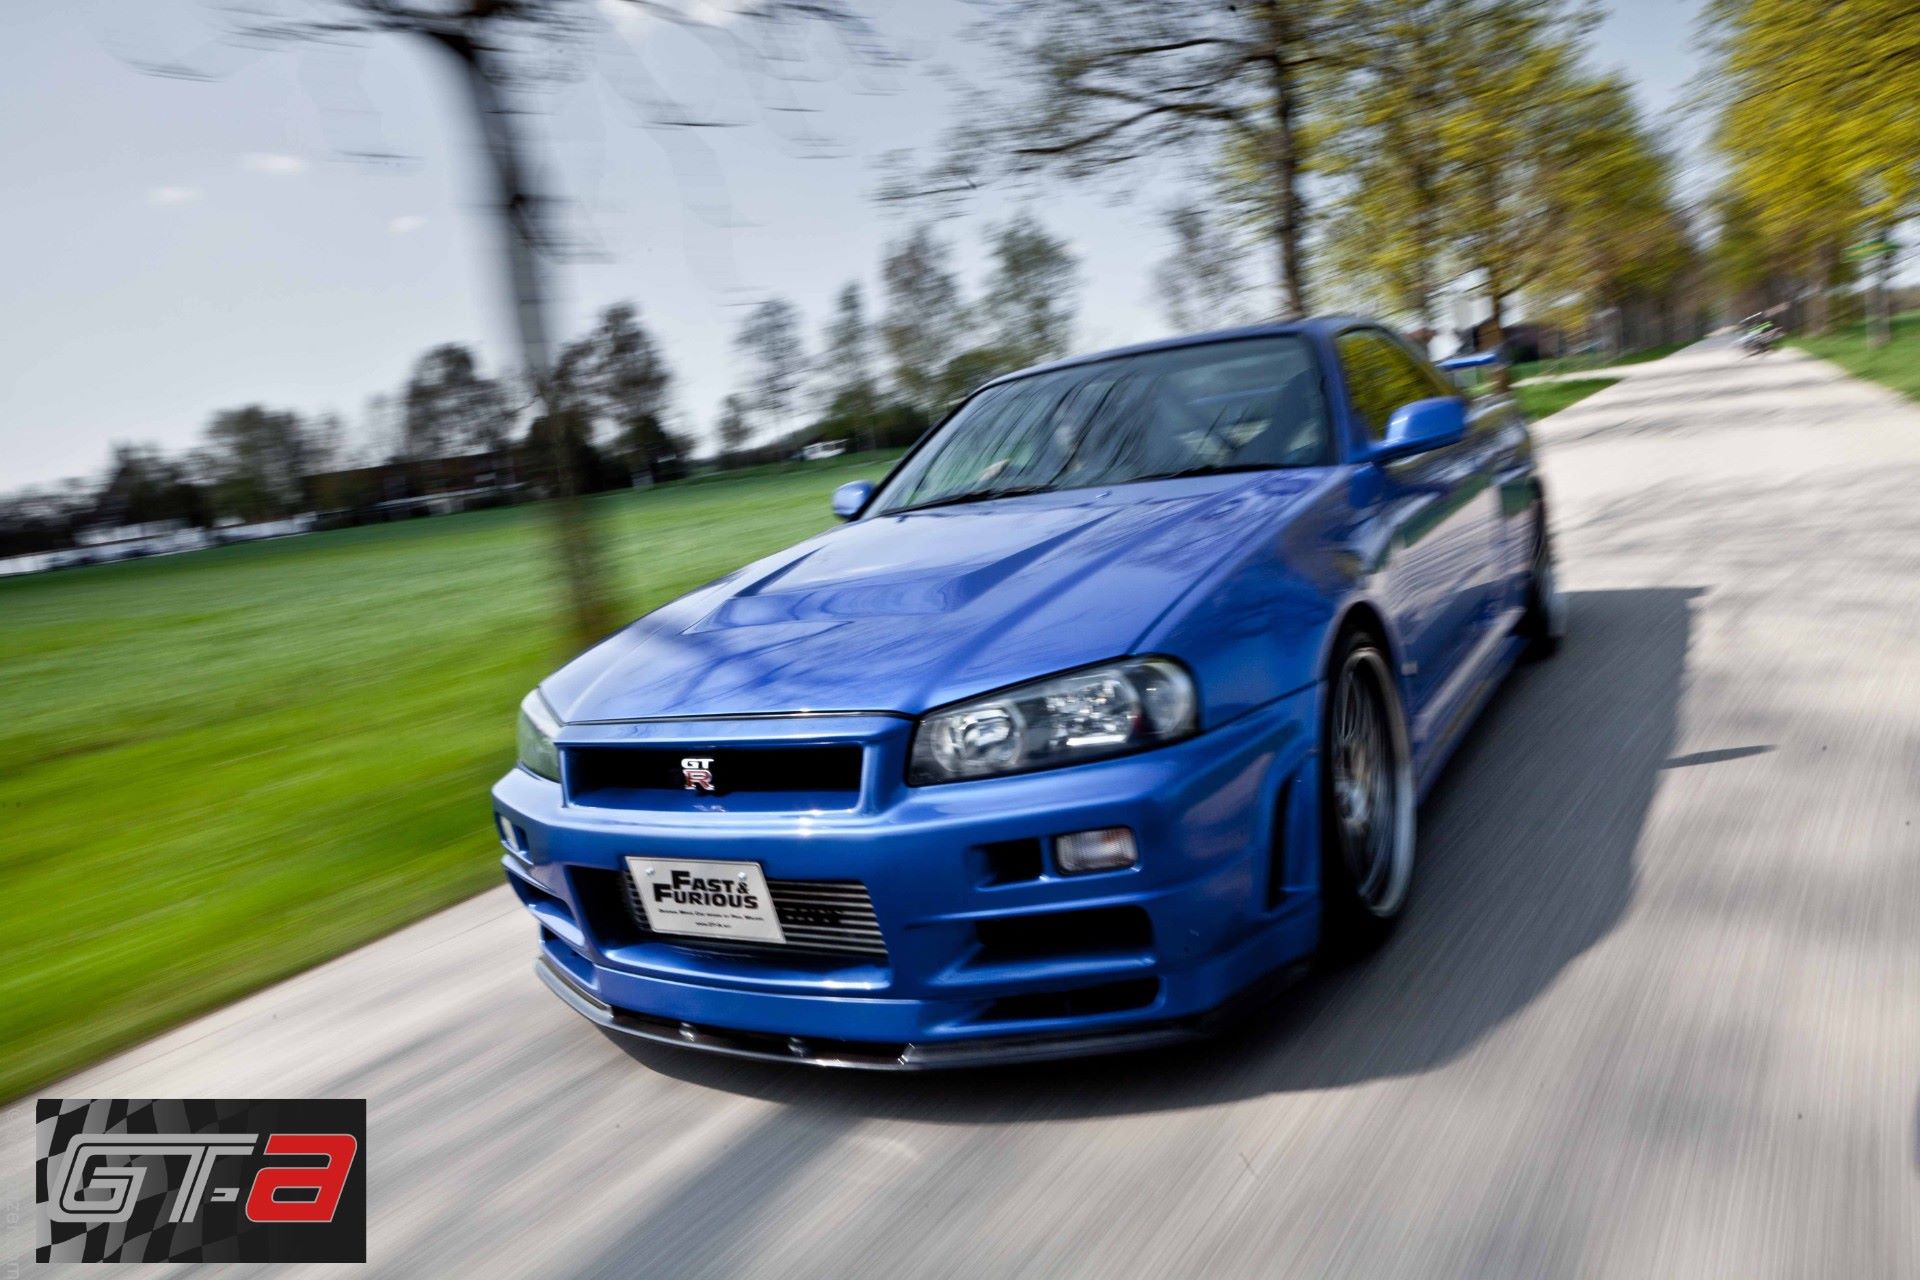 Nissan-Skyline-GT-R-R34-Fast-and-Furious-4-auction-4